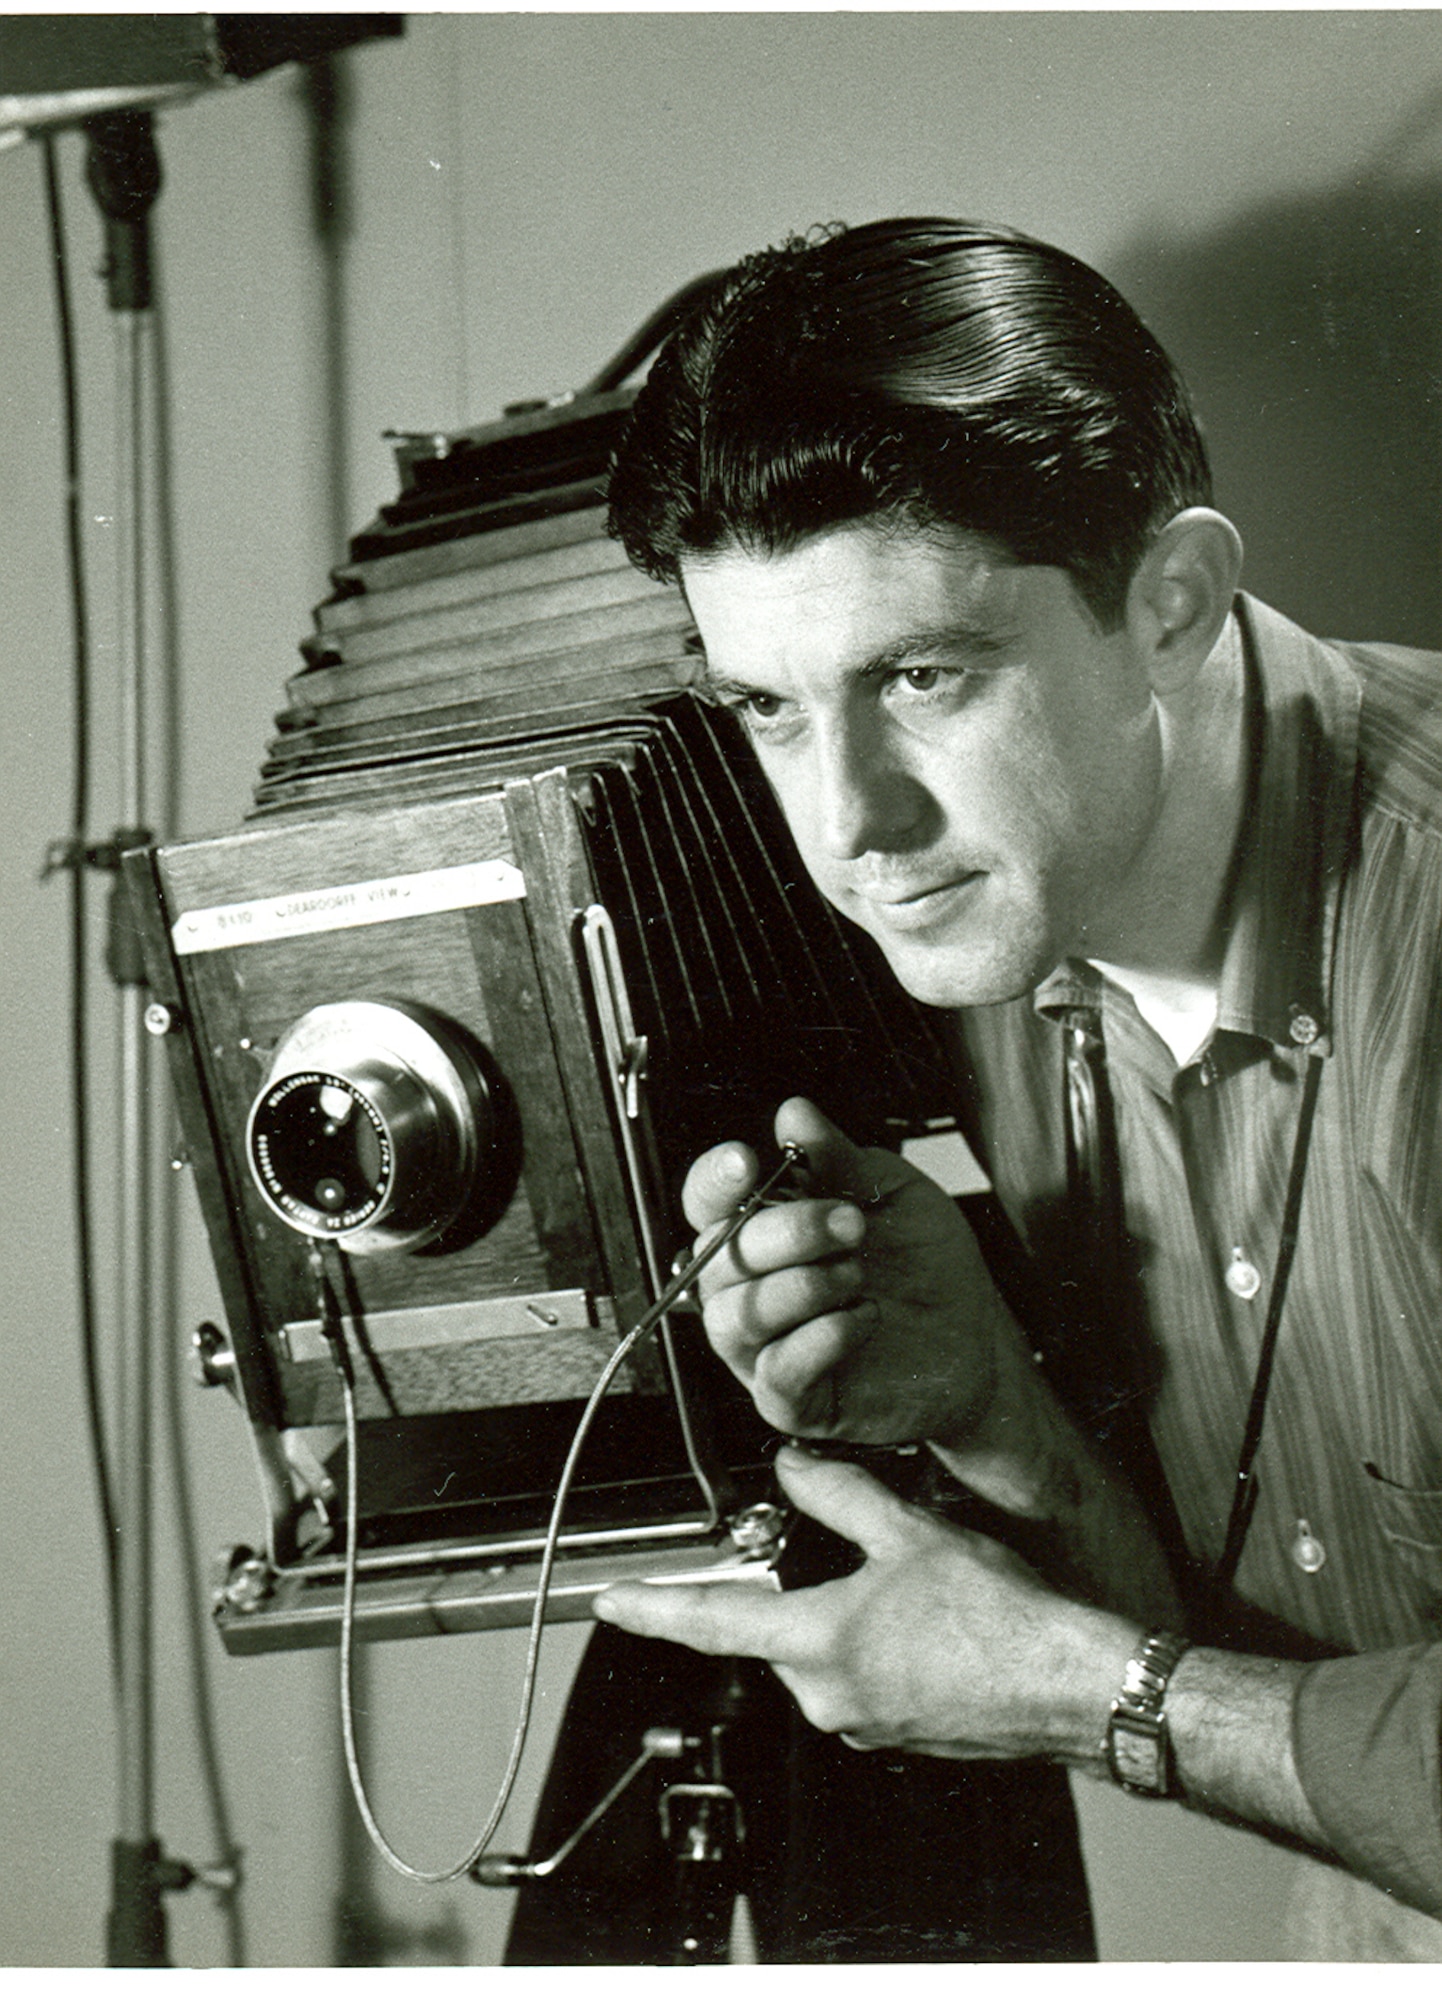 Phil Tarver with a Deardorff view camera in an informal work portrait taken at AEDC in 1958. (Photo provided)